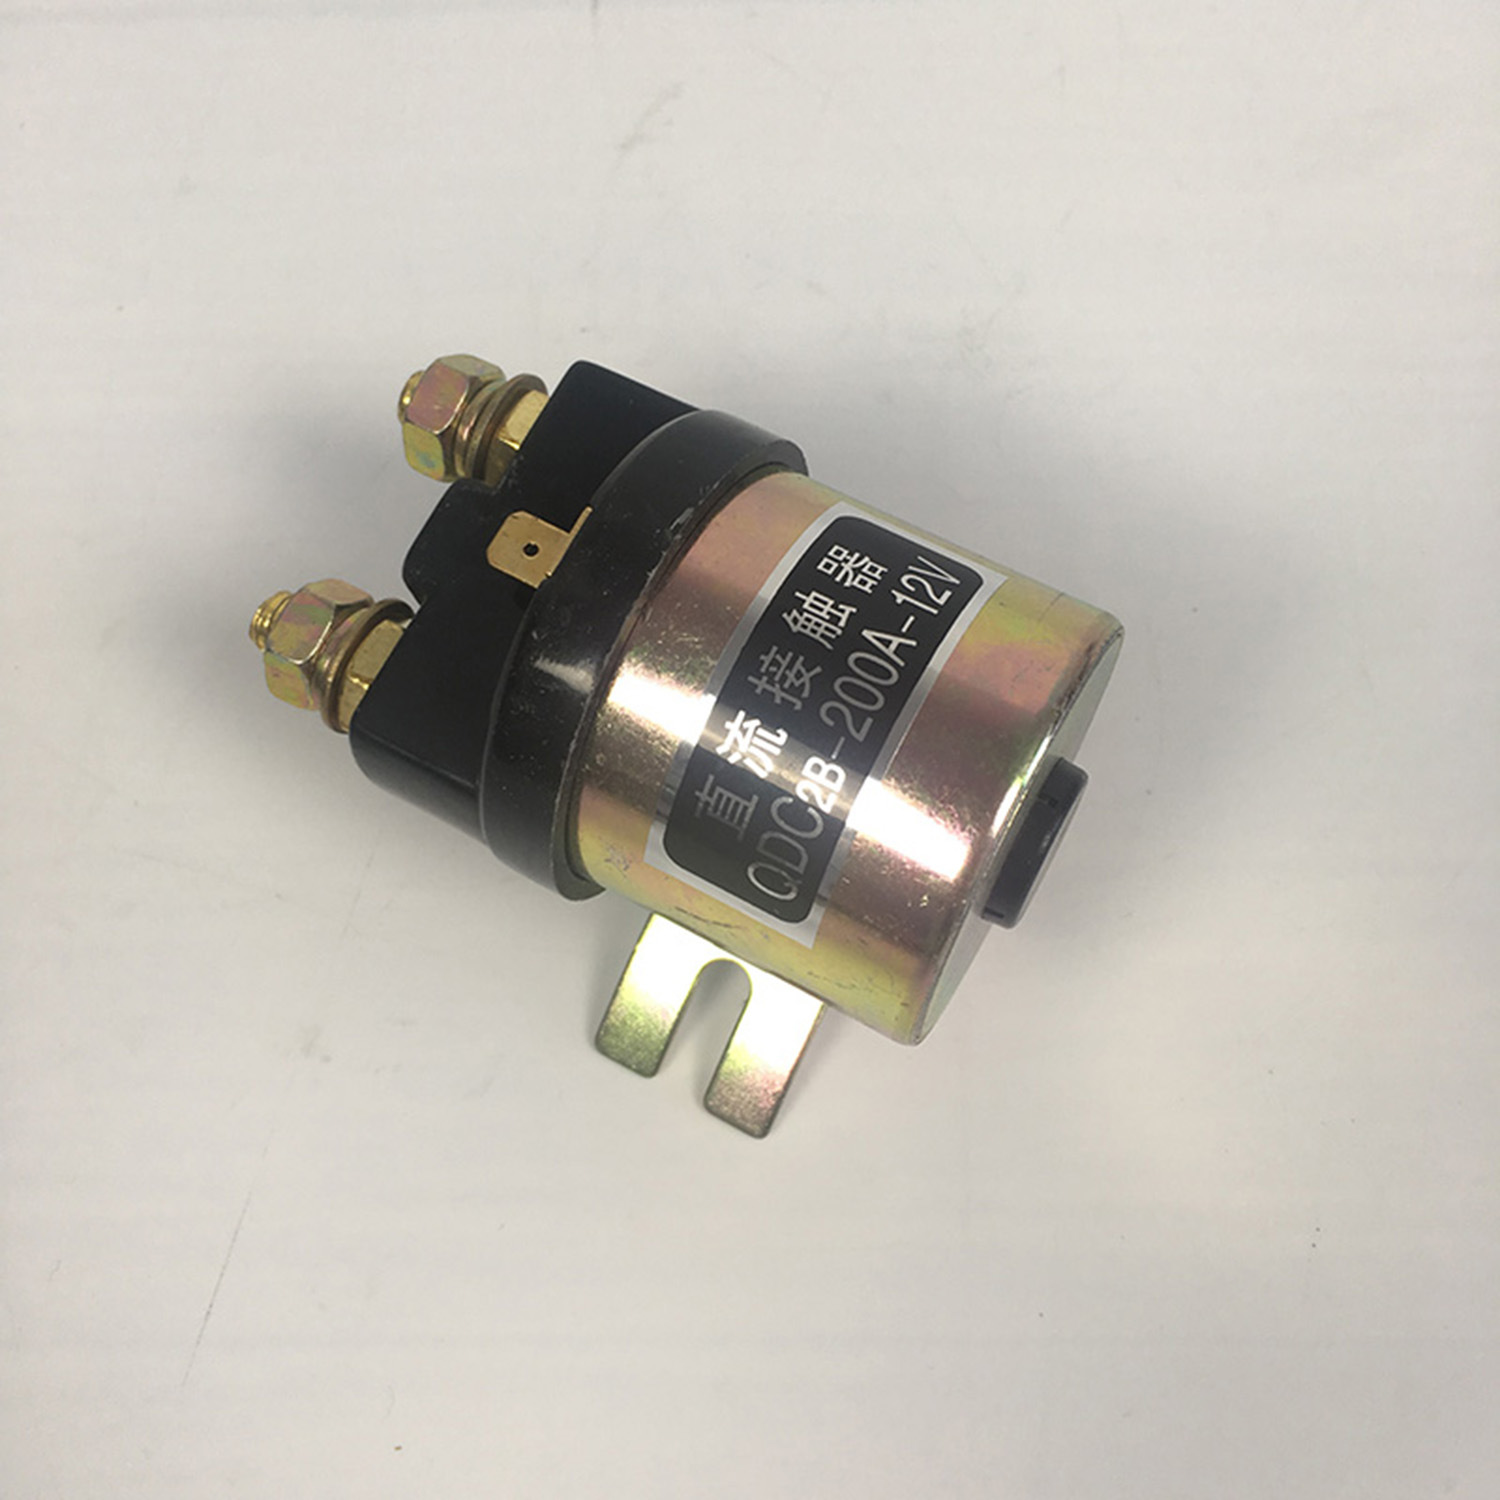 12V Copper Mini Hydraulic Switch for Power Pump Packs